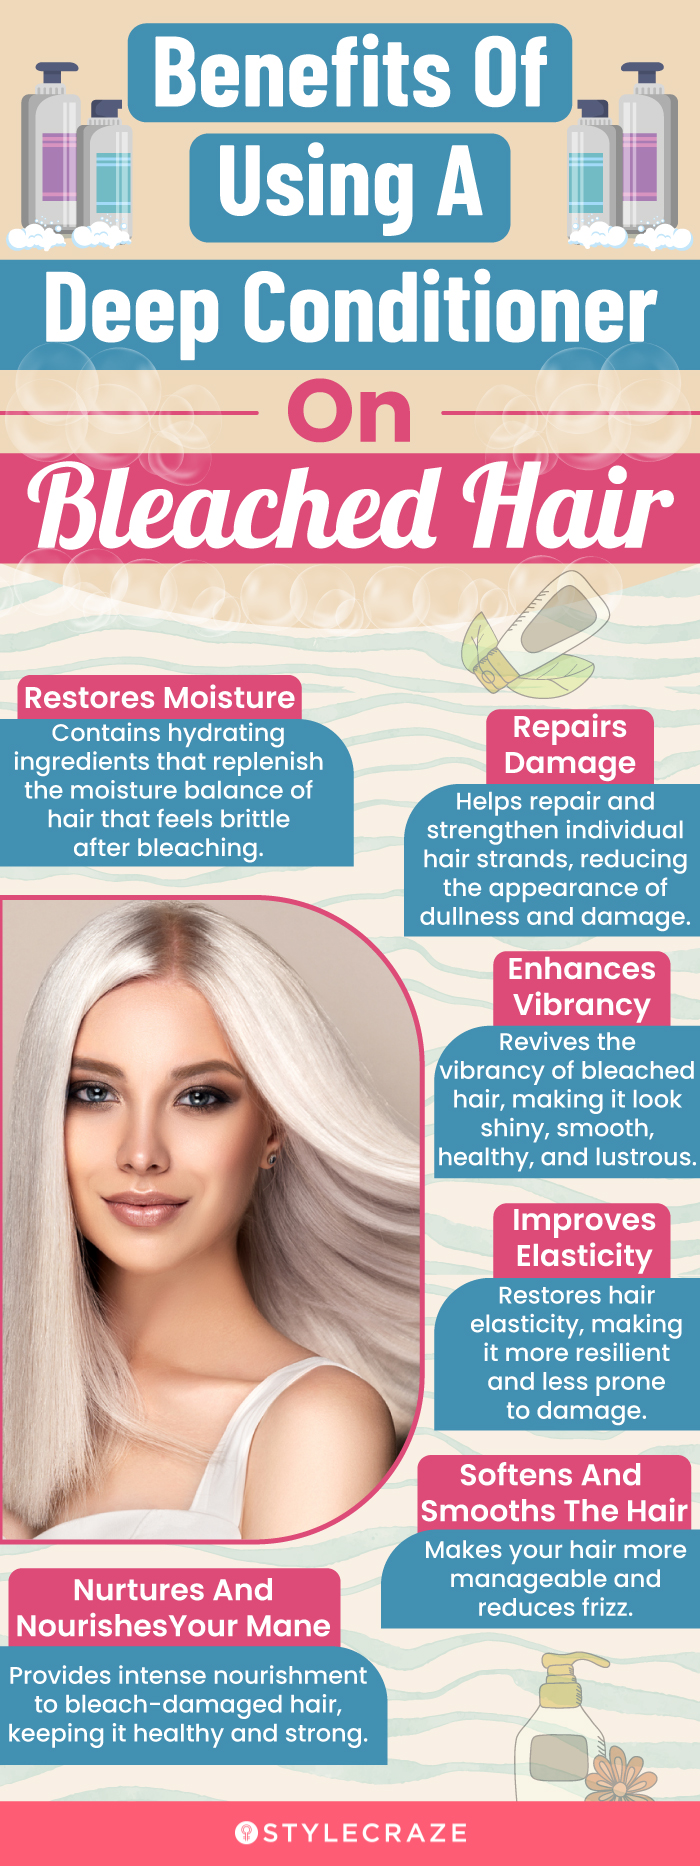 Benefits Of Using A Deep Conditioner On Bleached Hair (infographic)